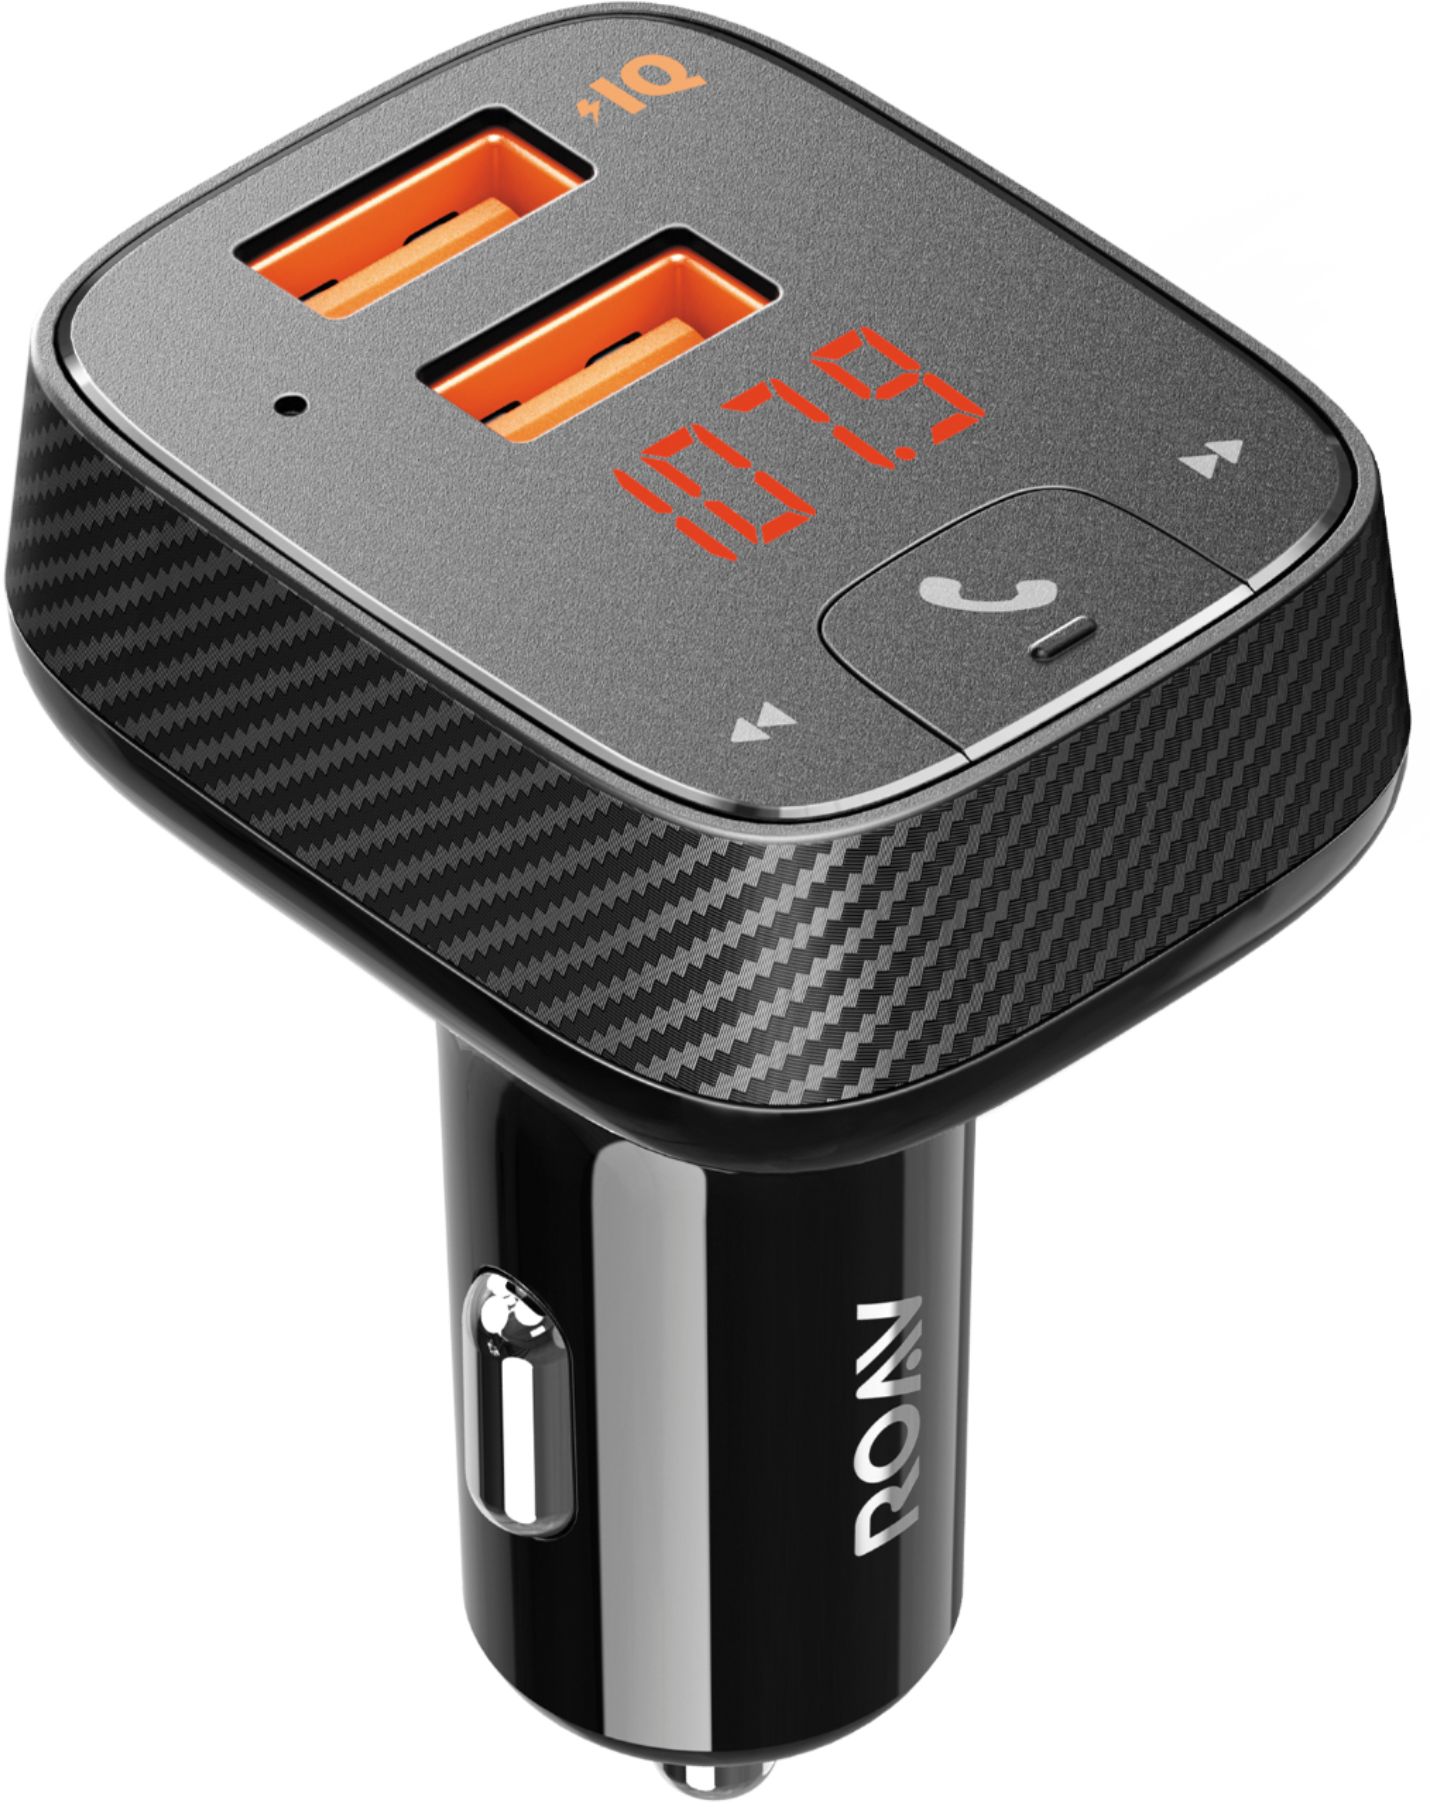  Anker Roav SmartCharge F2 Bluetooth FM Transmitter, Wireless  Audio Adapter and Receiver, Car Charger with Bluetooth, Car Locator, App  Support, 2 USB Ports, PowerIQ : Electronics